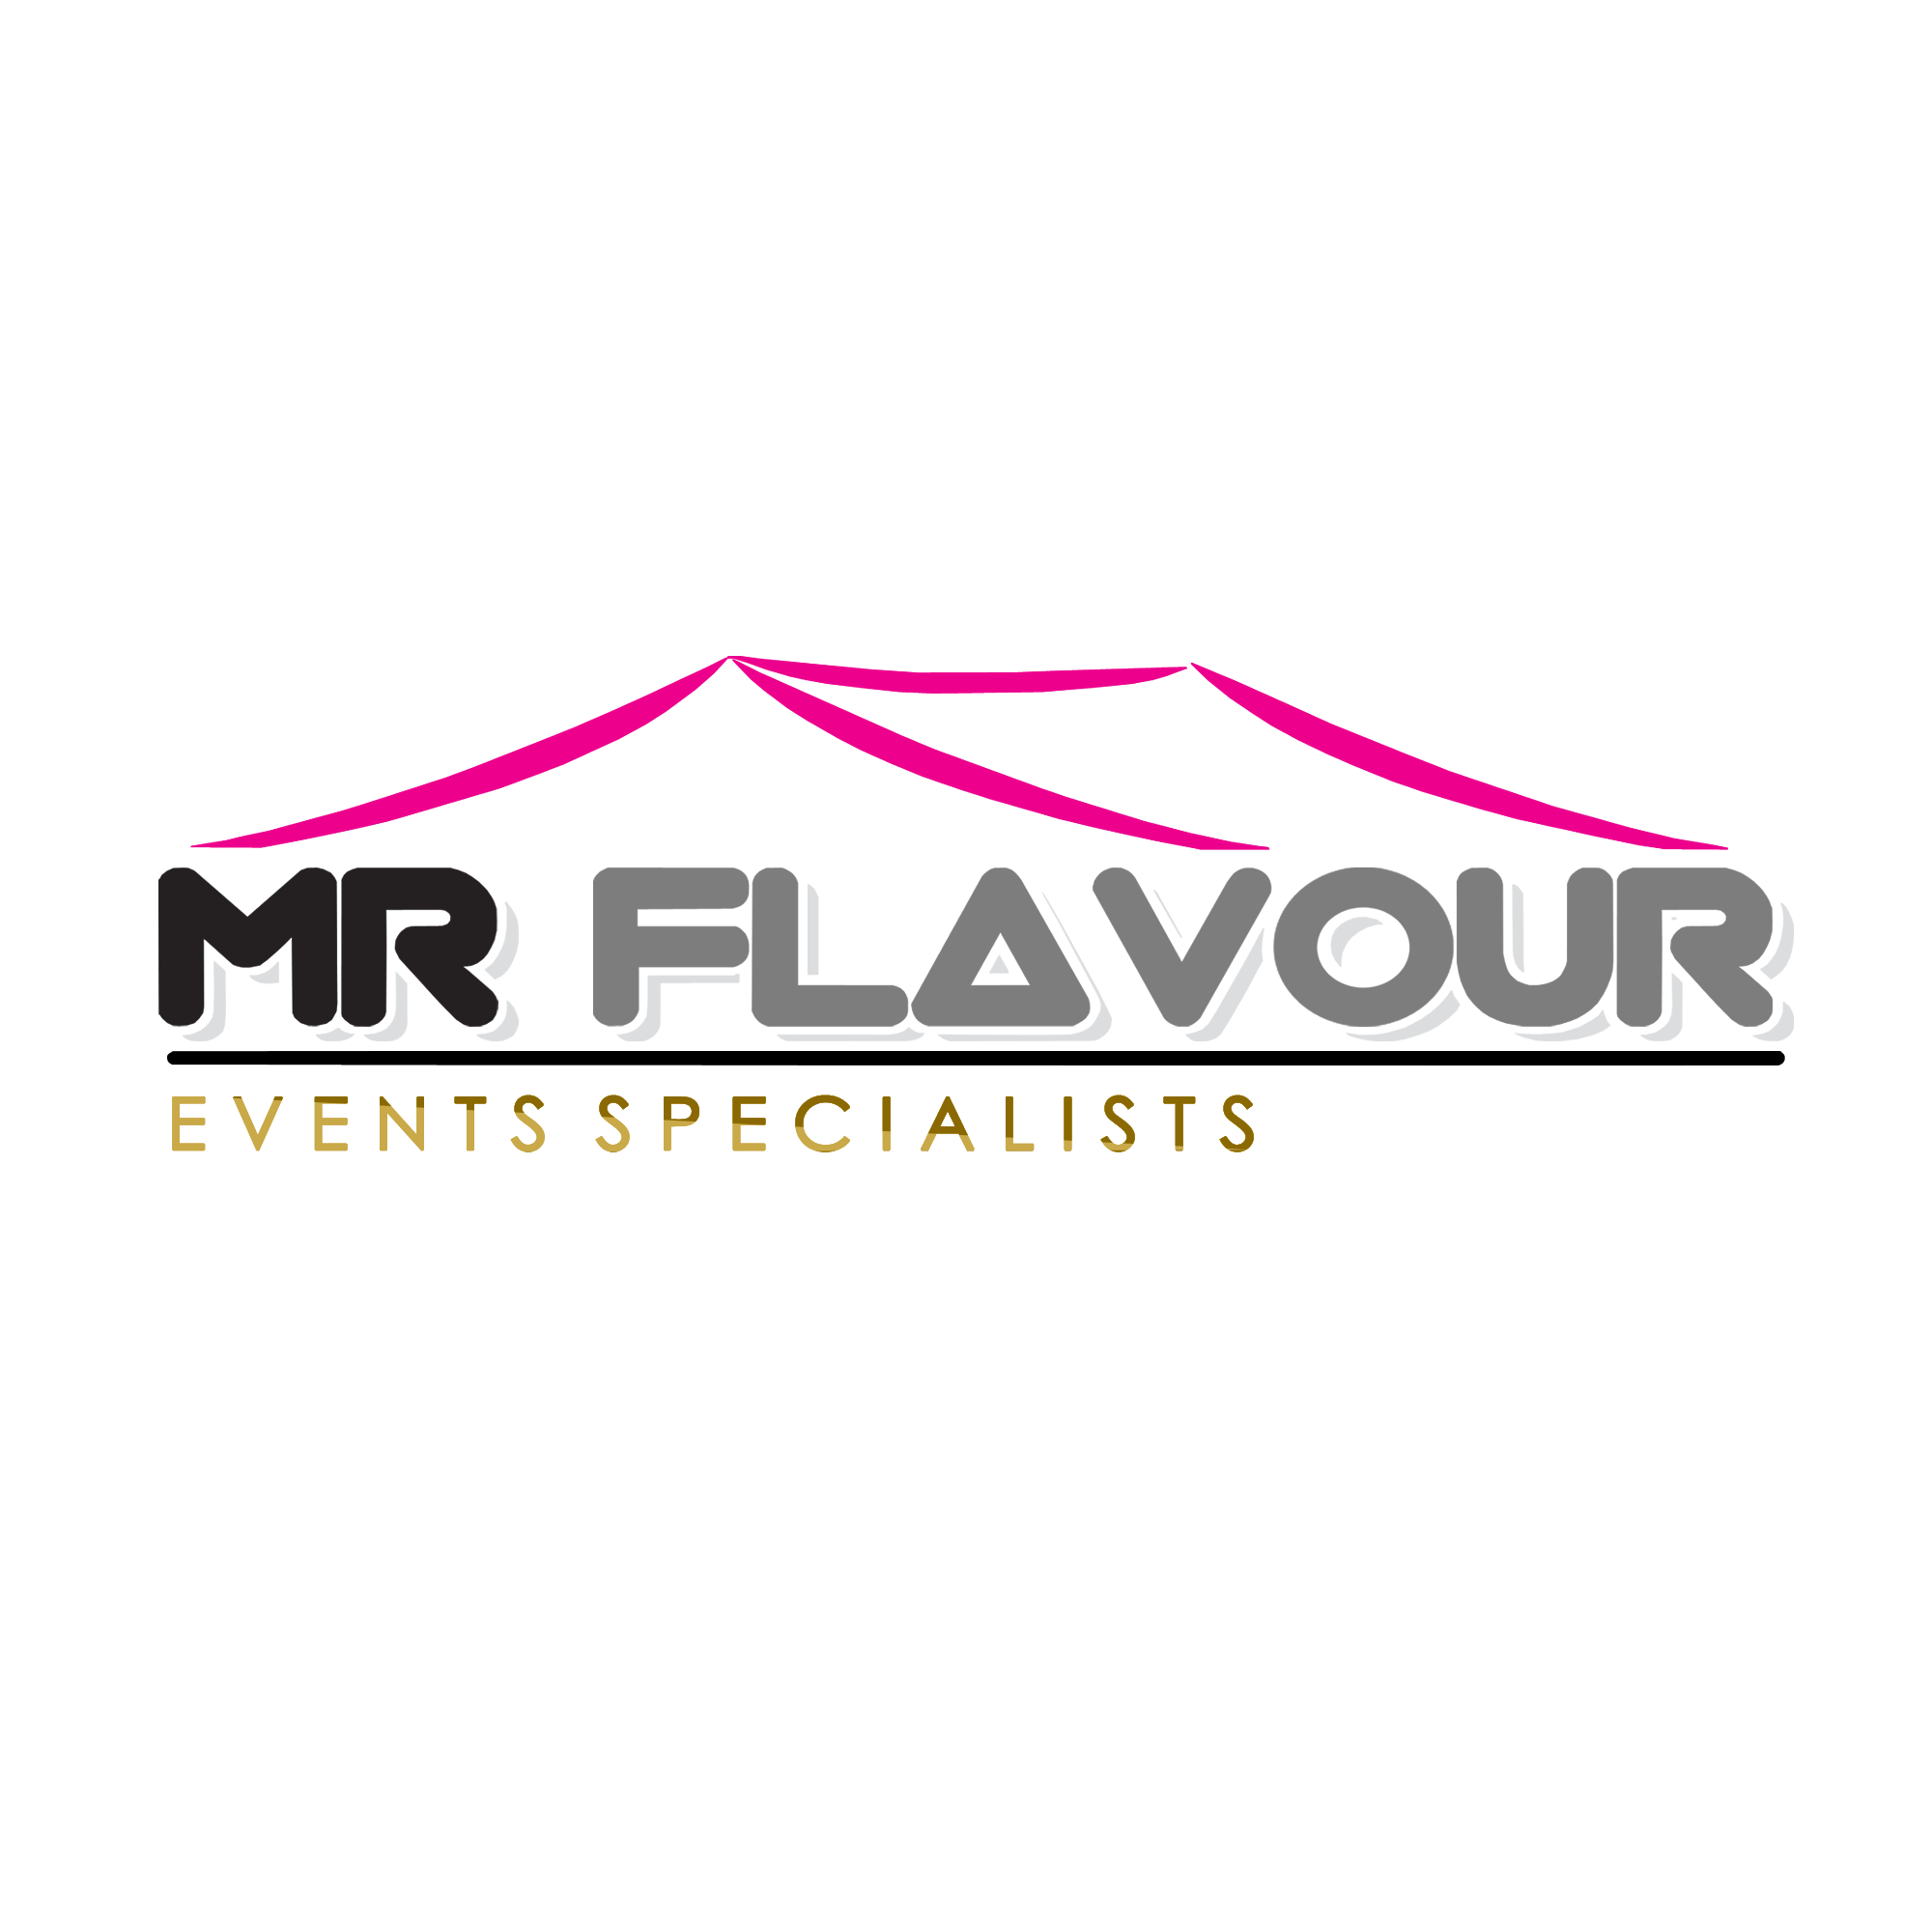 Mr Flavour Events profile on Qualified.One